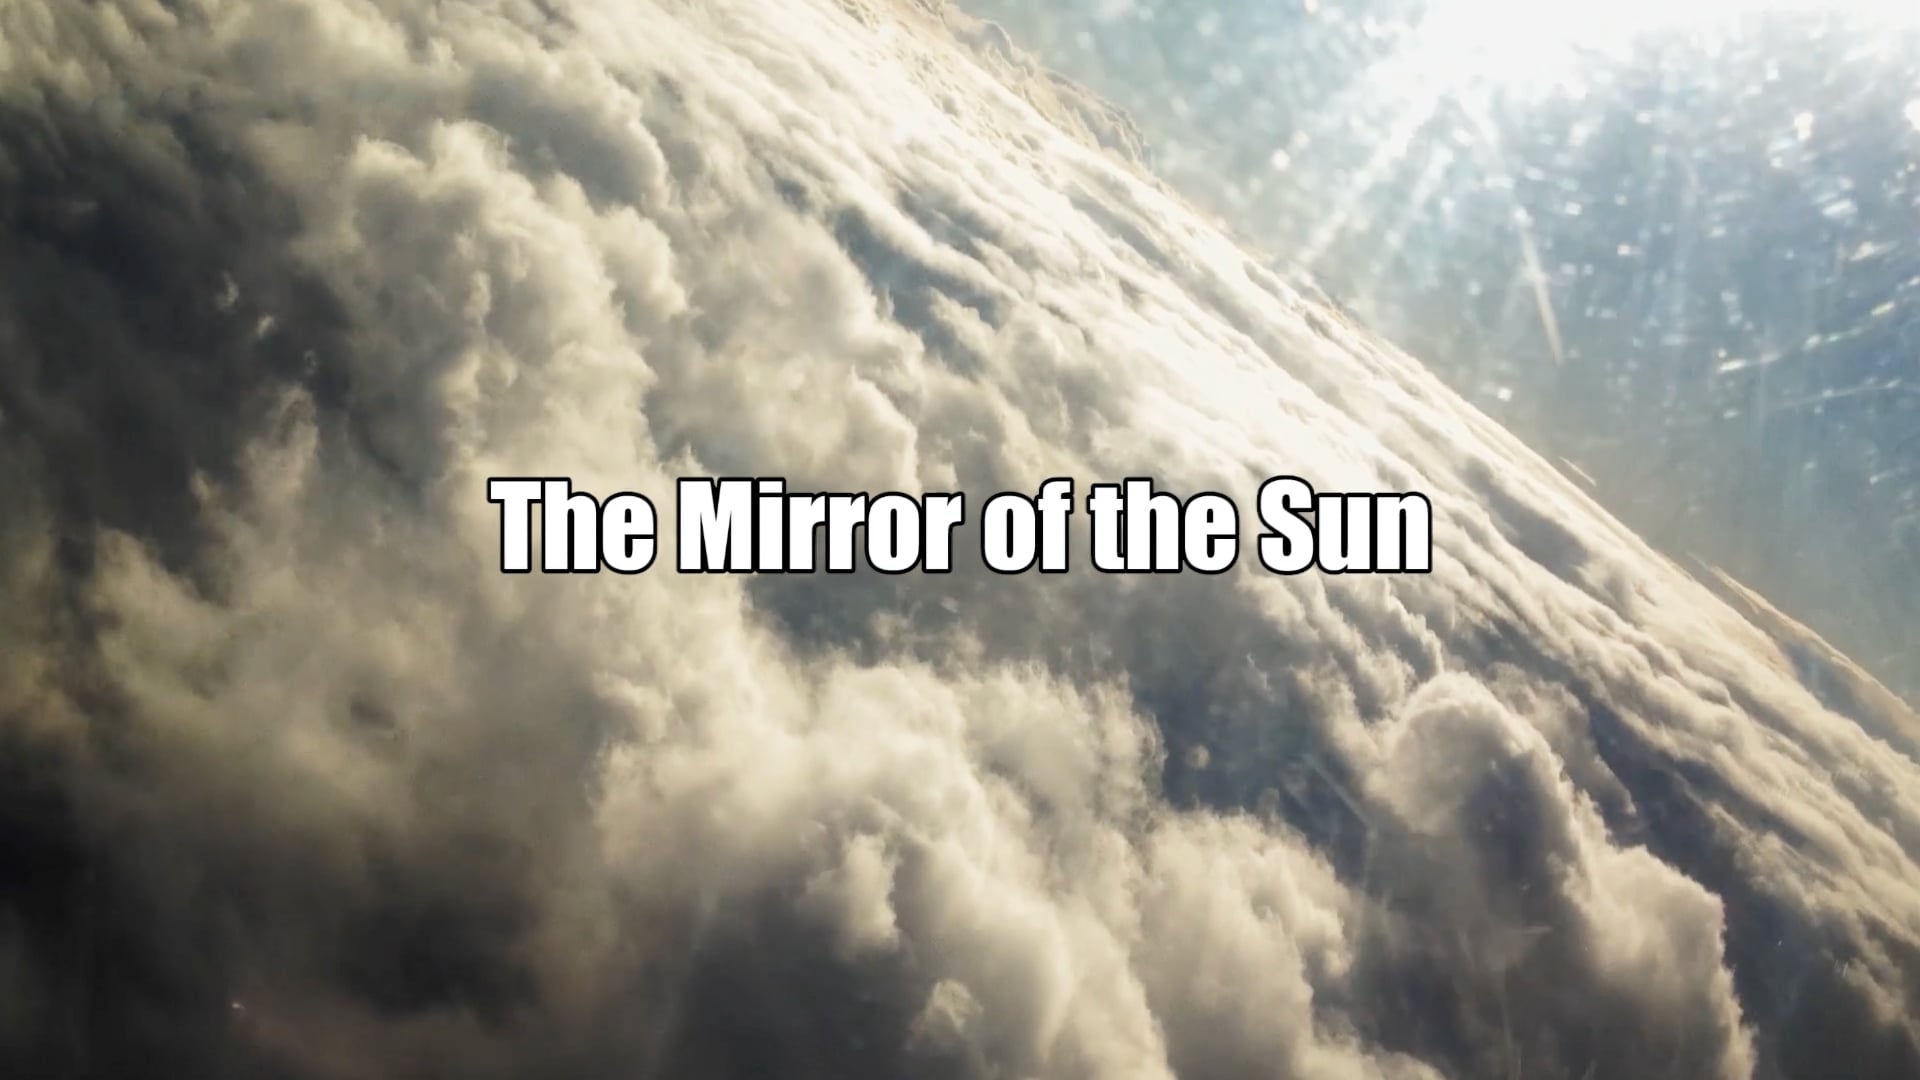 Watch Full Movie - The Mirror of the Sun - the Story of Combat Navigator Tamar Ariel